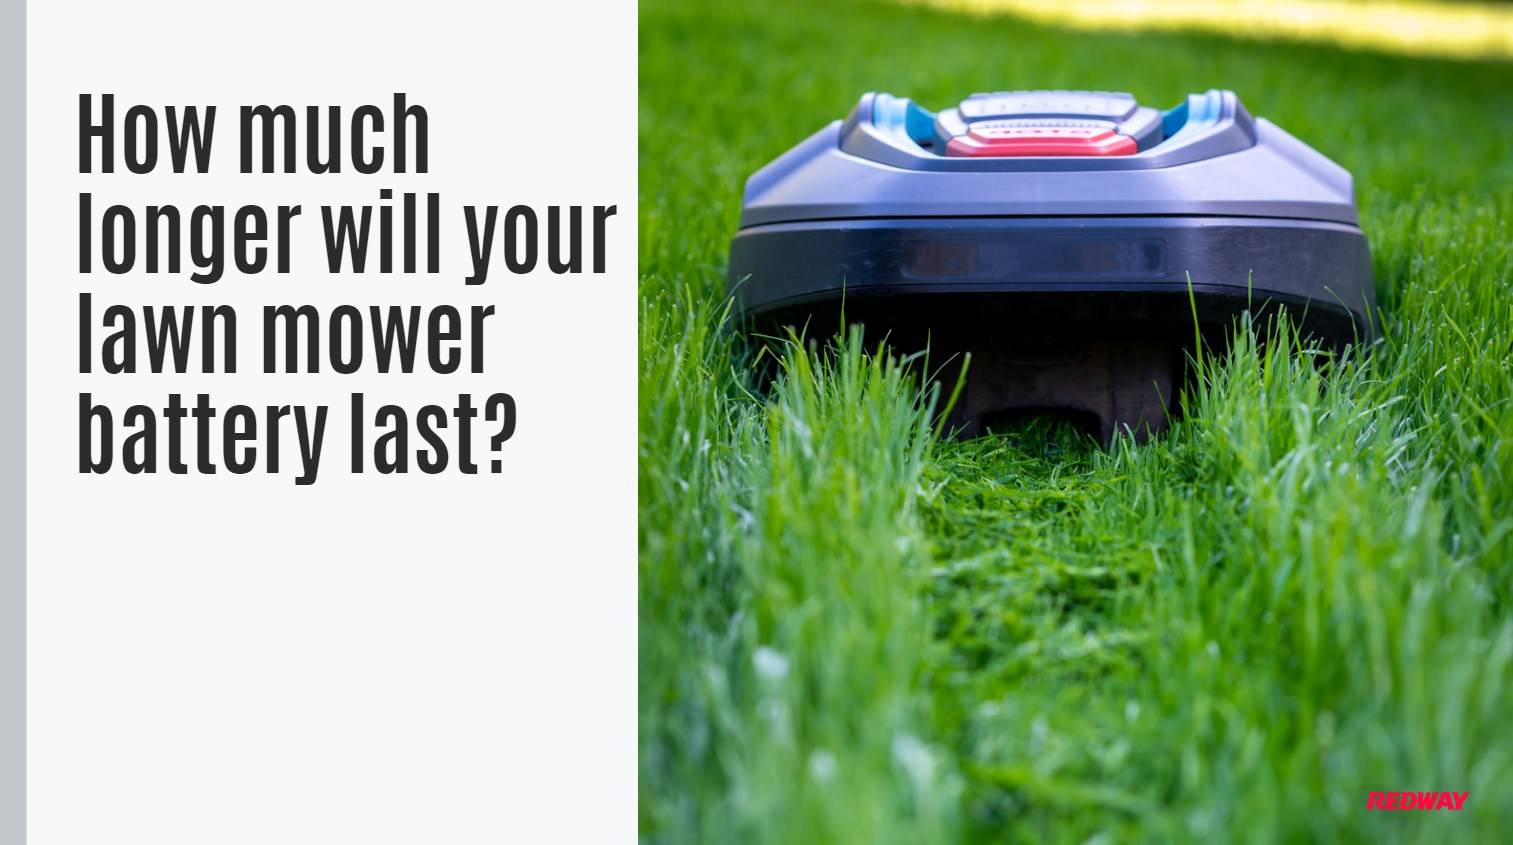 How much longer will your lawn mower battery last? How Long Should You Leave A Trickle Charger On A Lawn Mower Battery?